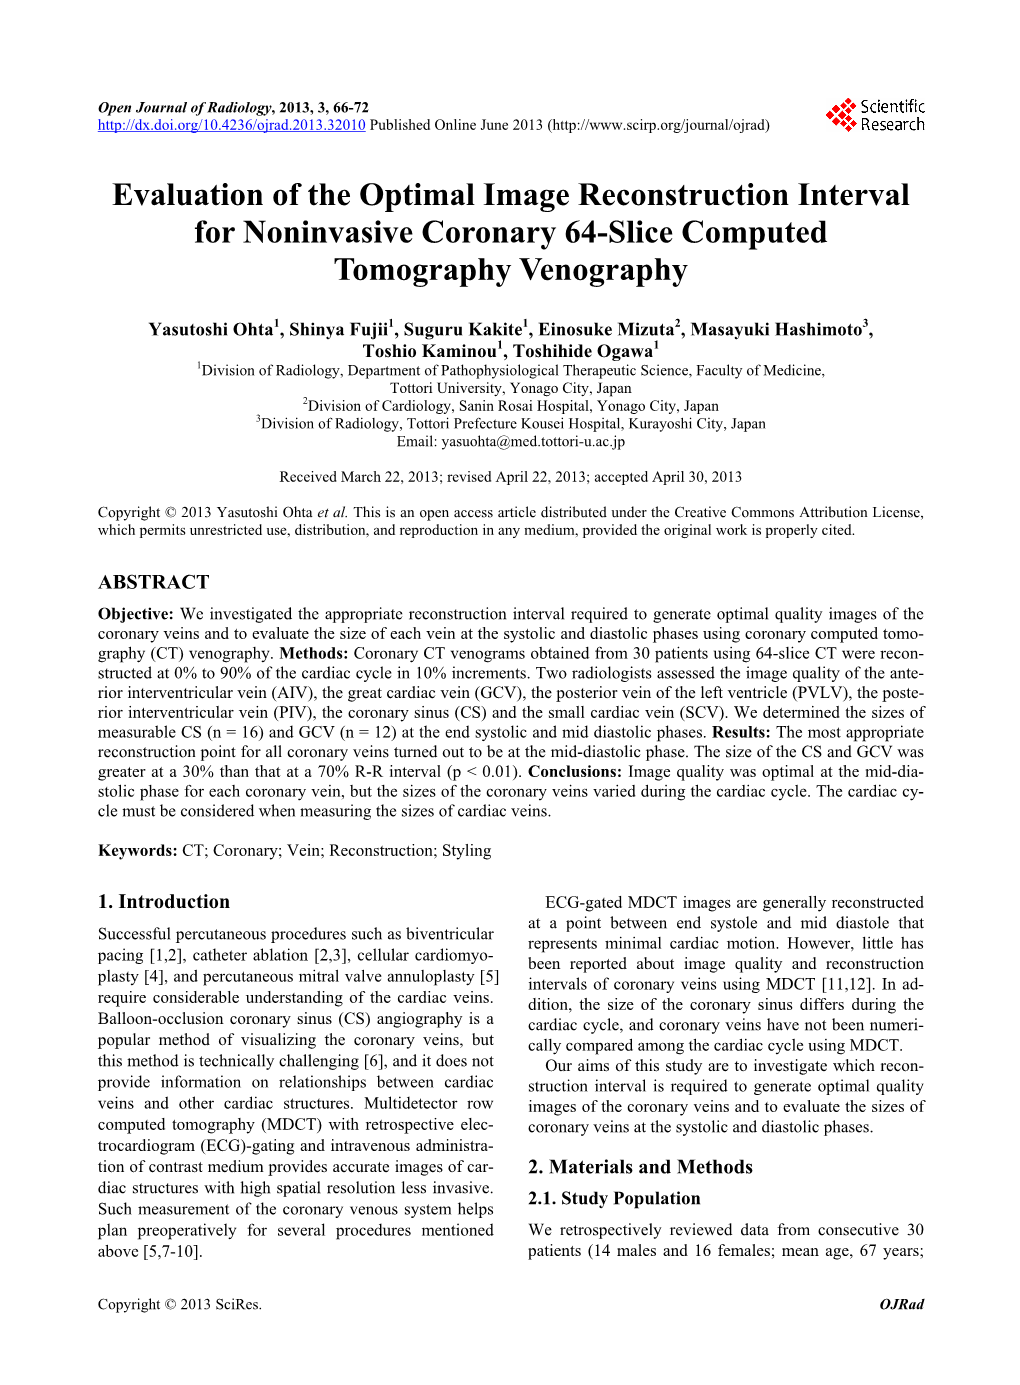 Evaluation of the Optimal Image Reconstruction Interval for Noninvasive Coronary 64-Slice Computed Tomography Venography